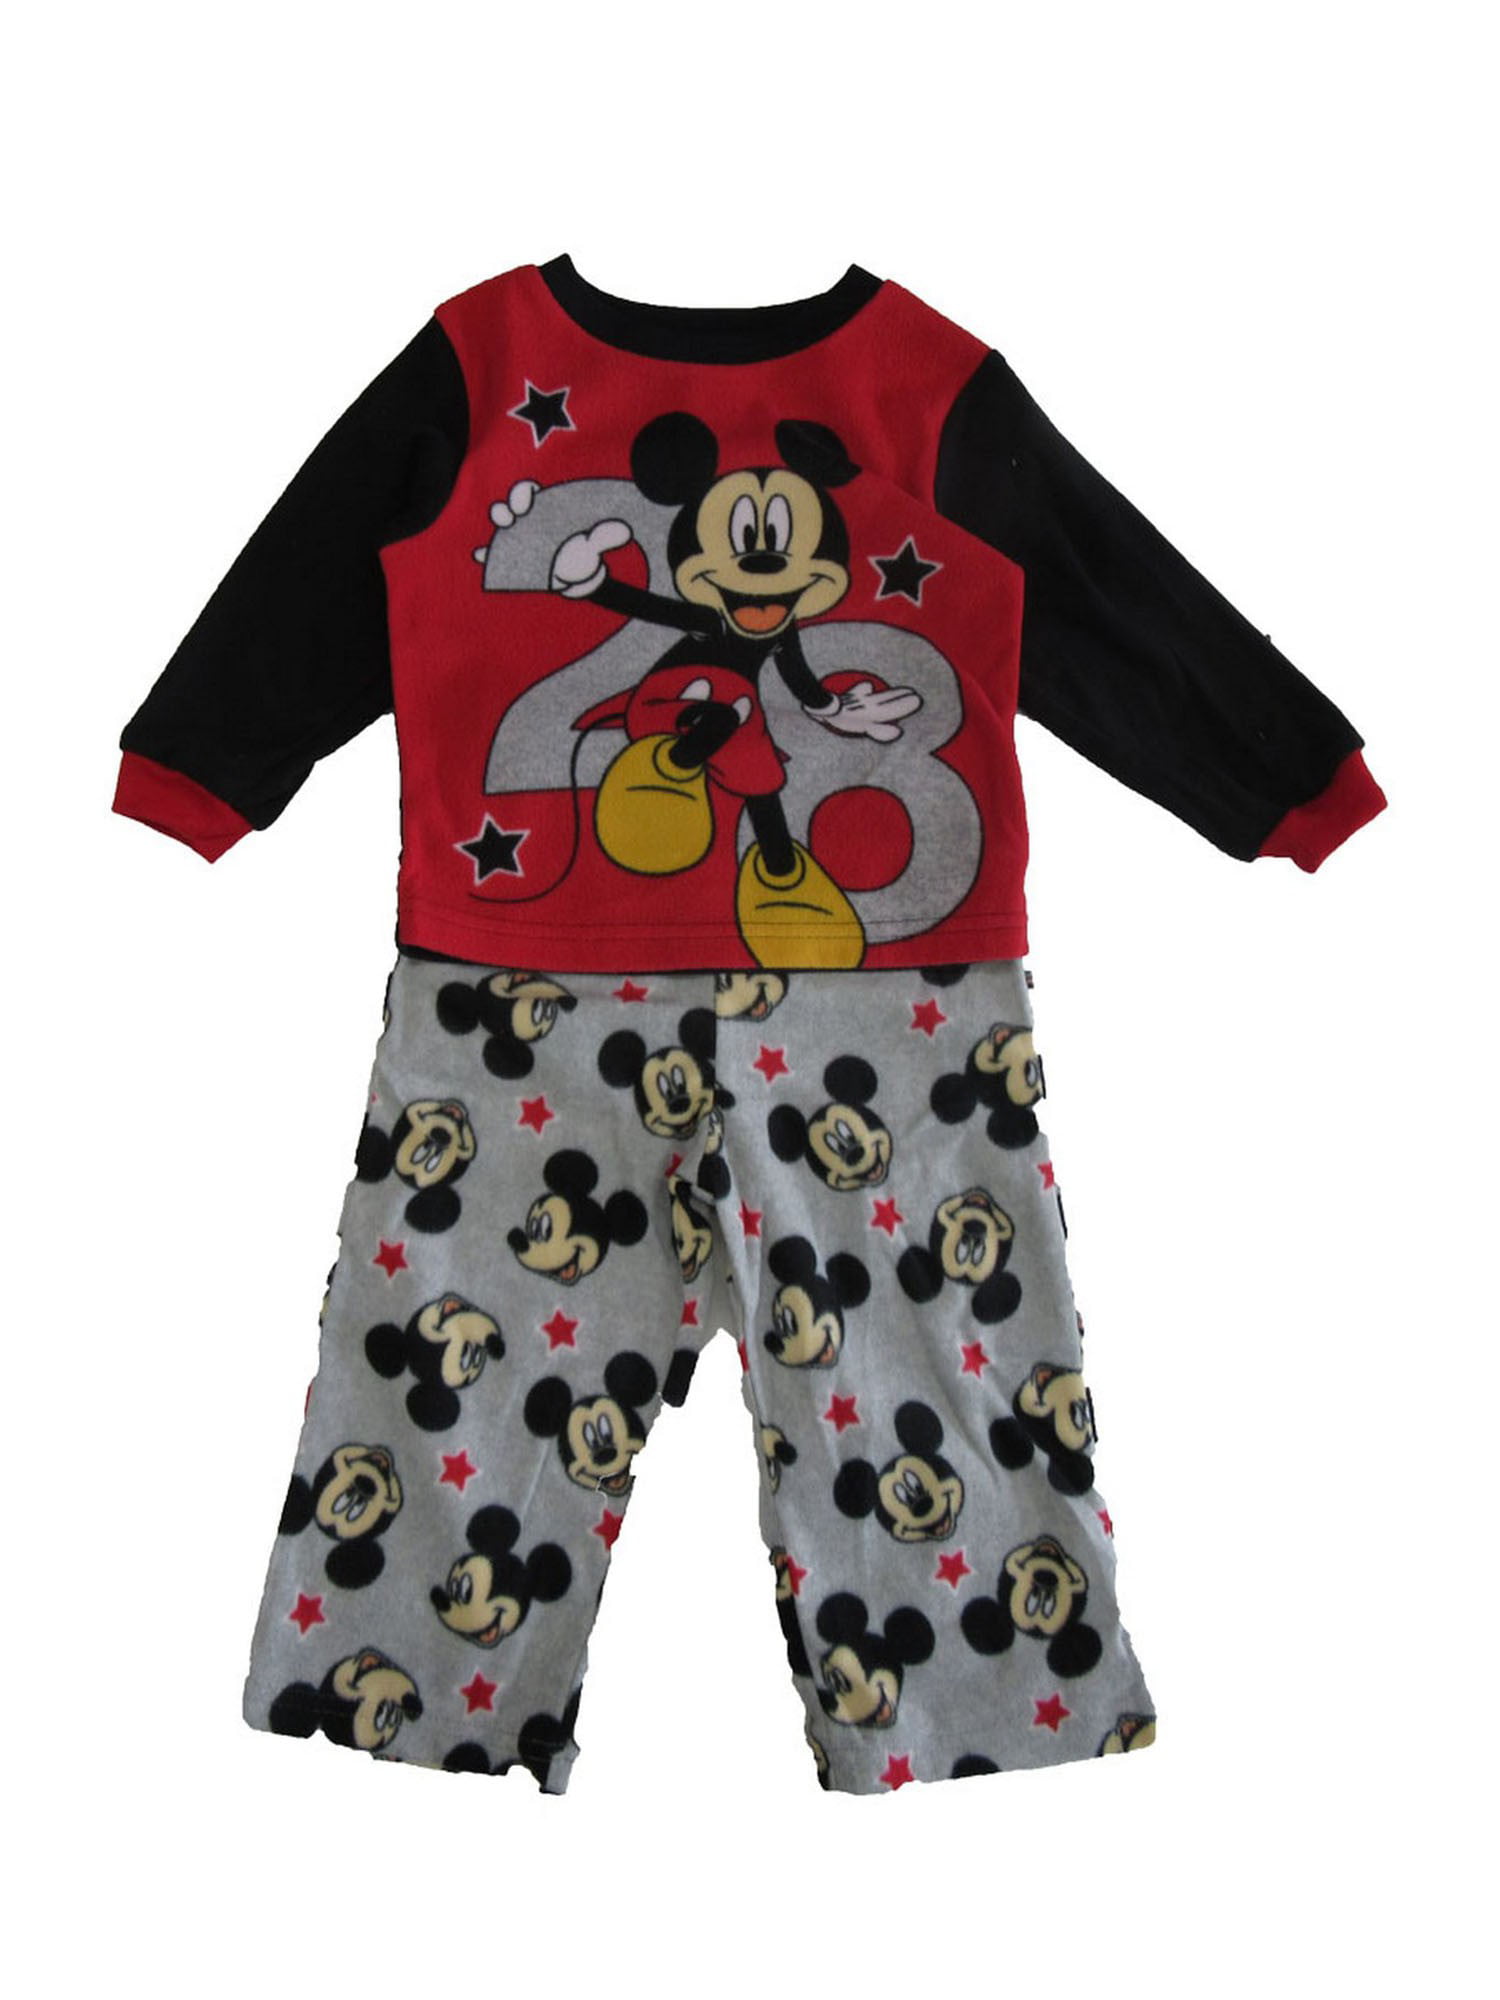 Toddler Boys L/S Pajama Set MICKEY MOUSE PLUTO Red Blue DISNEY Knit 2T 3T 4T 5T 